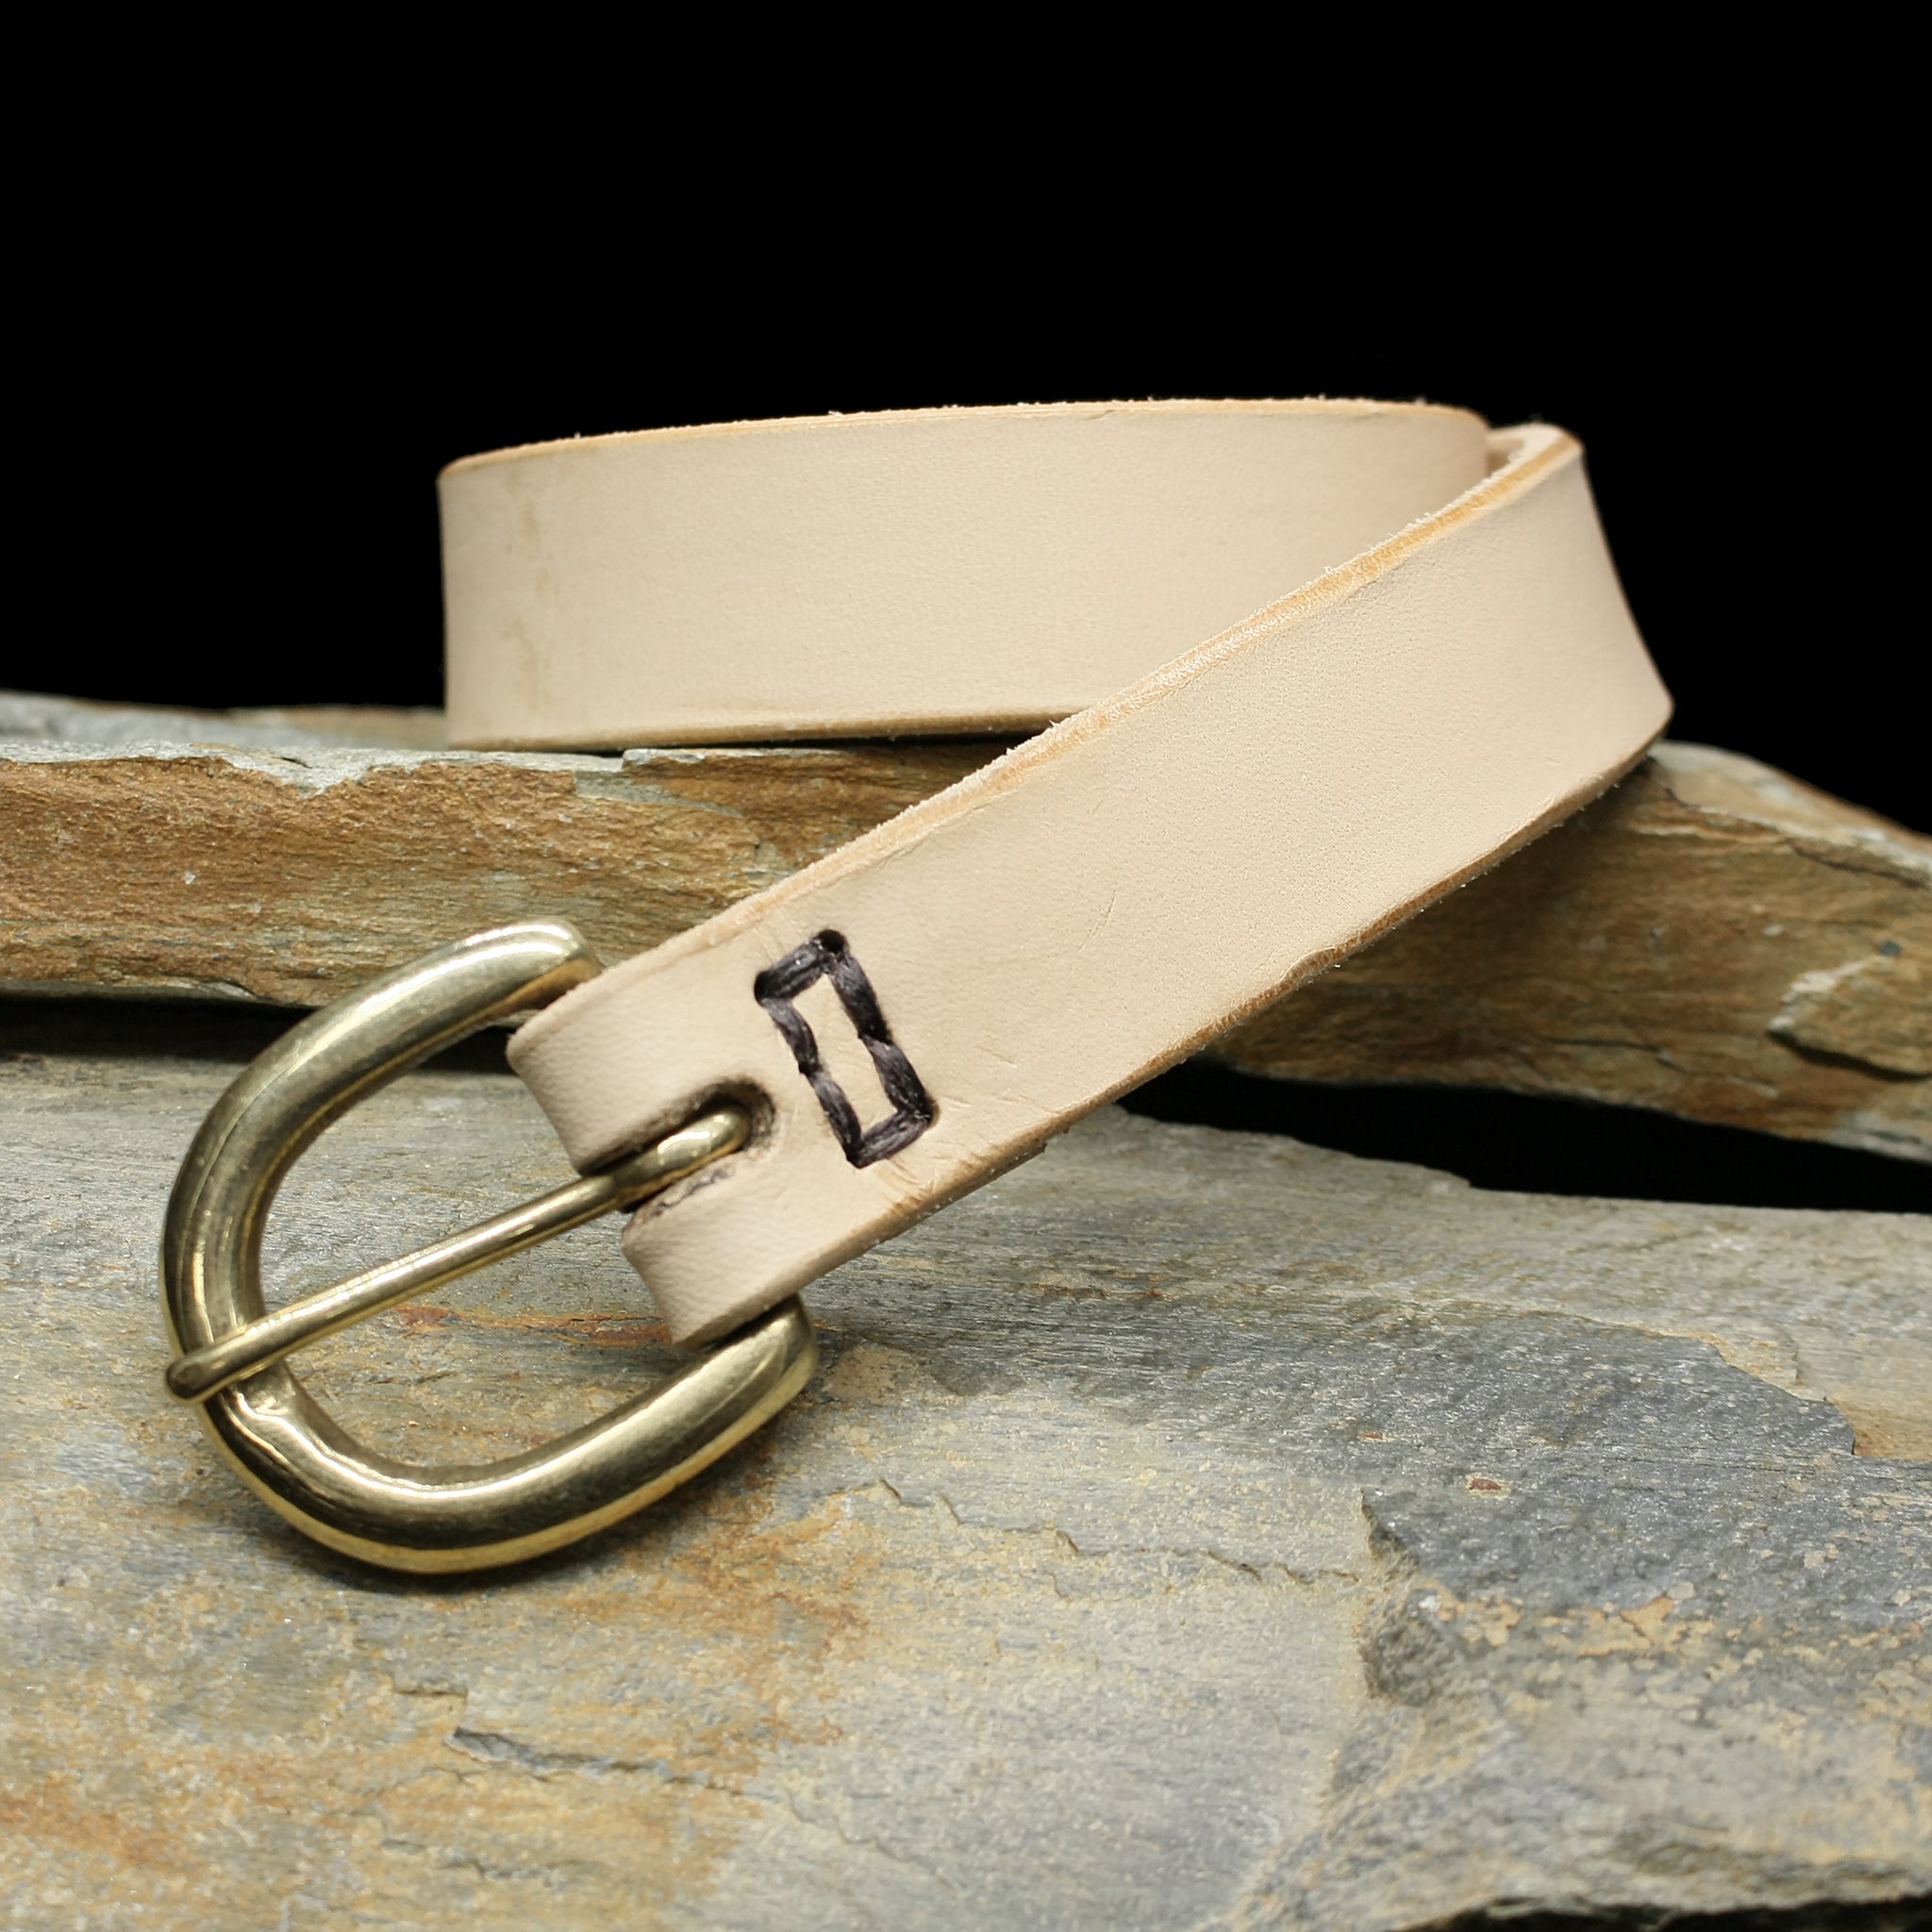 25mm (1 inch) leather Viking belt with brass buckle - Natural Veg Tan